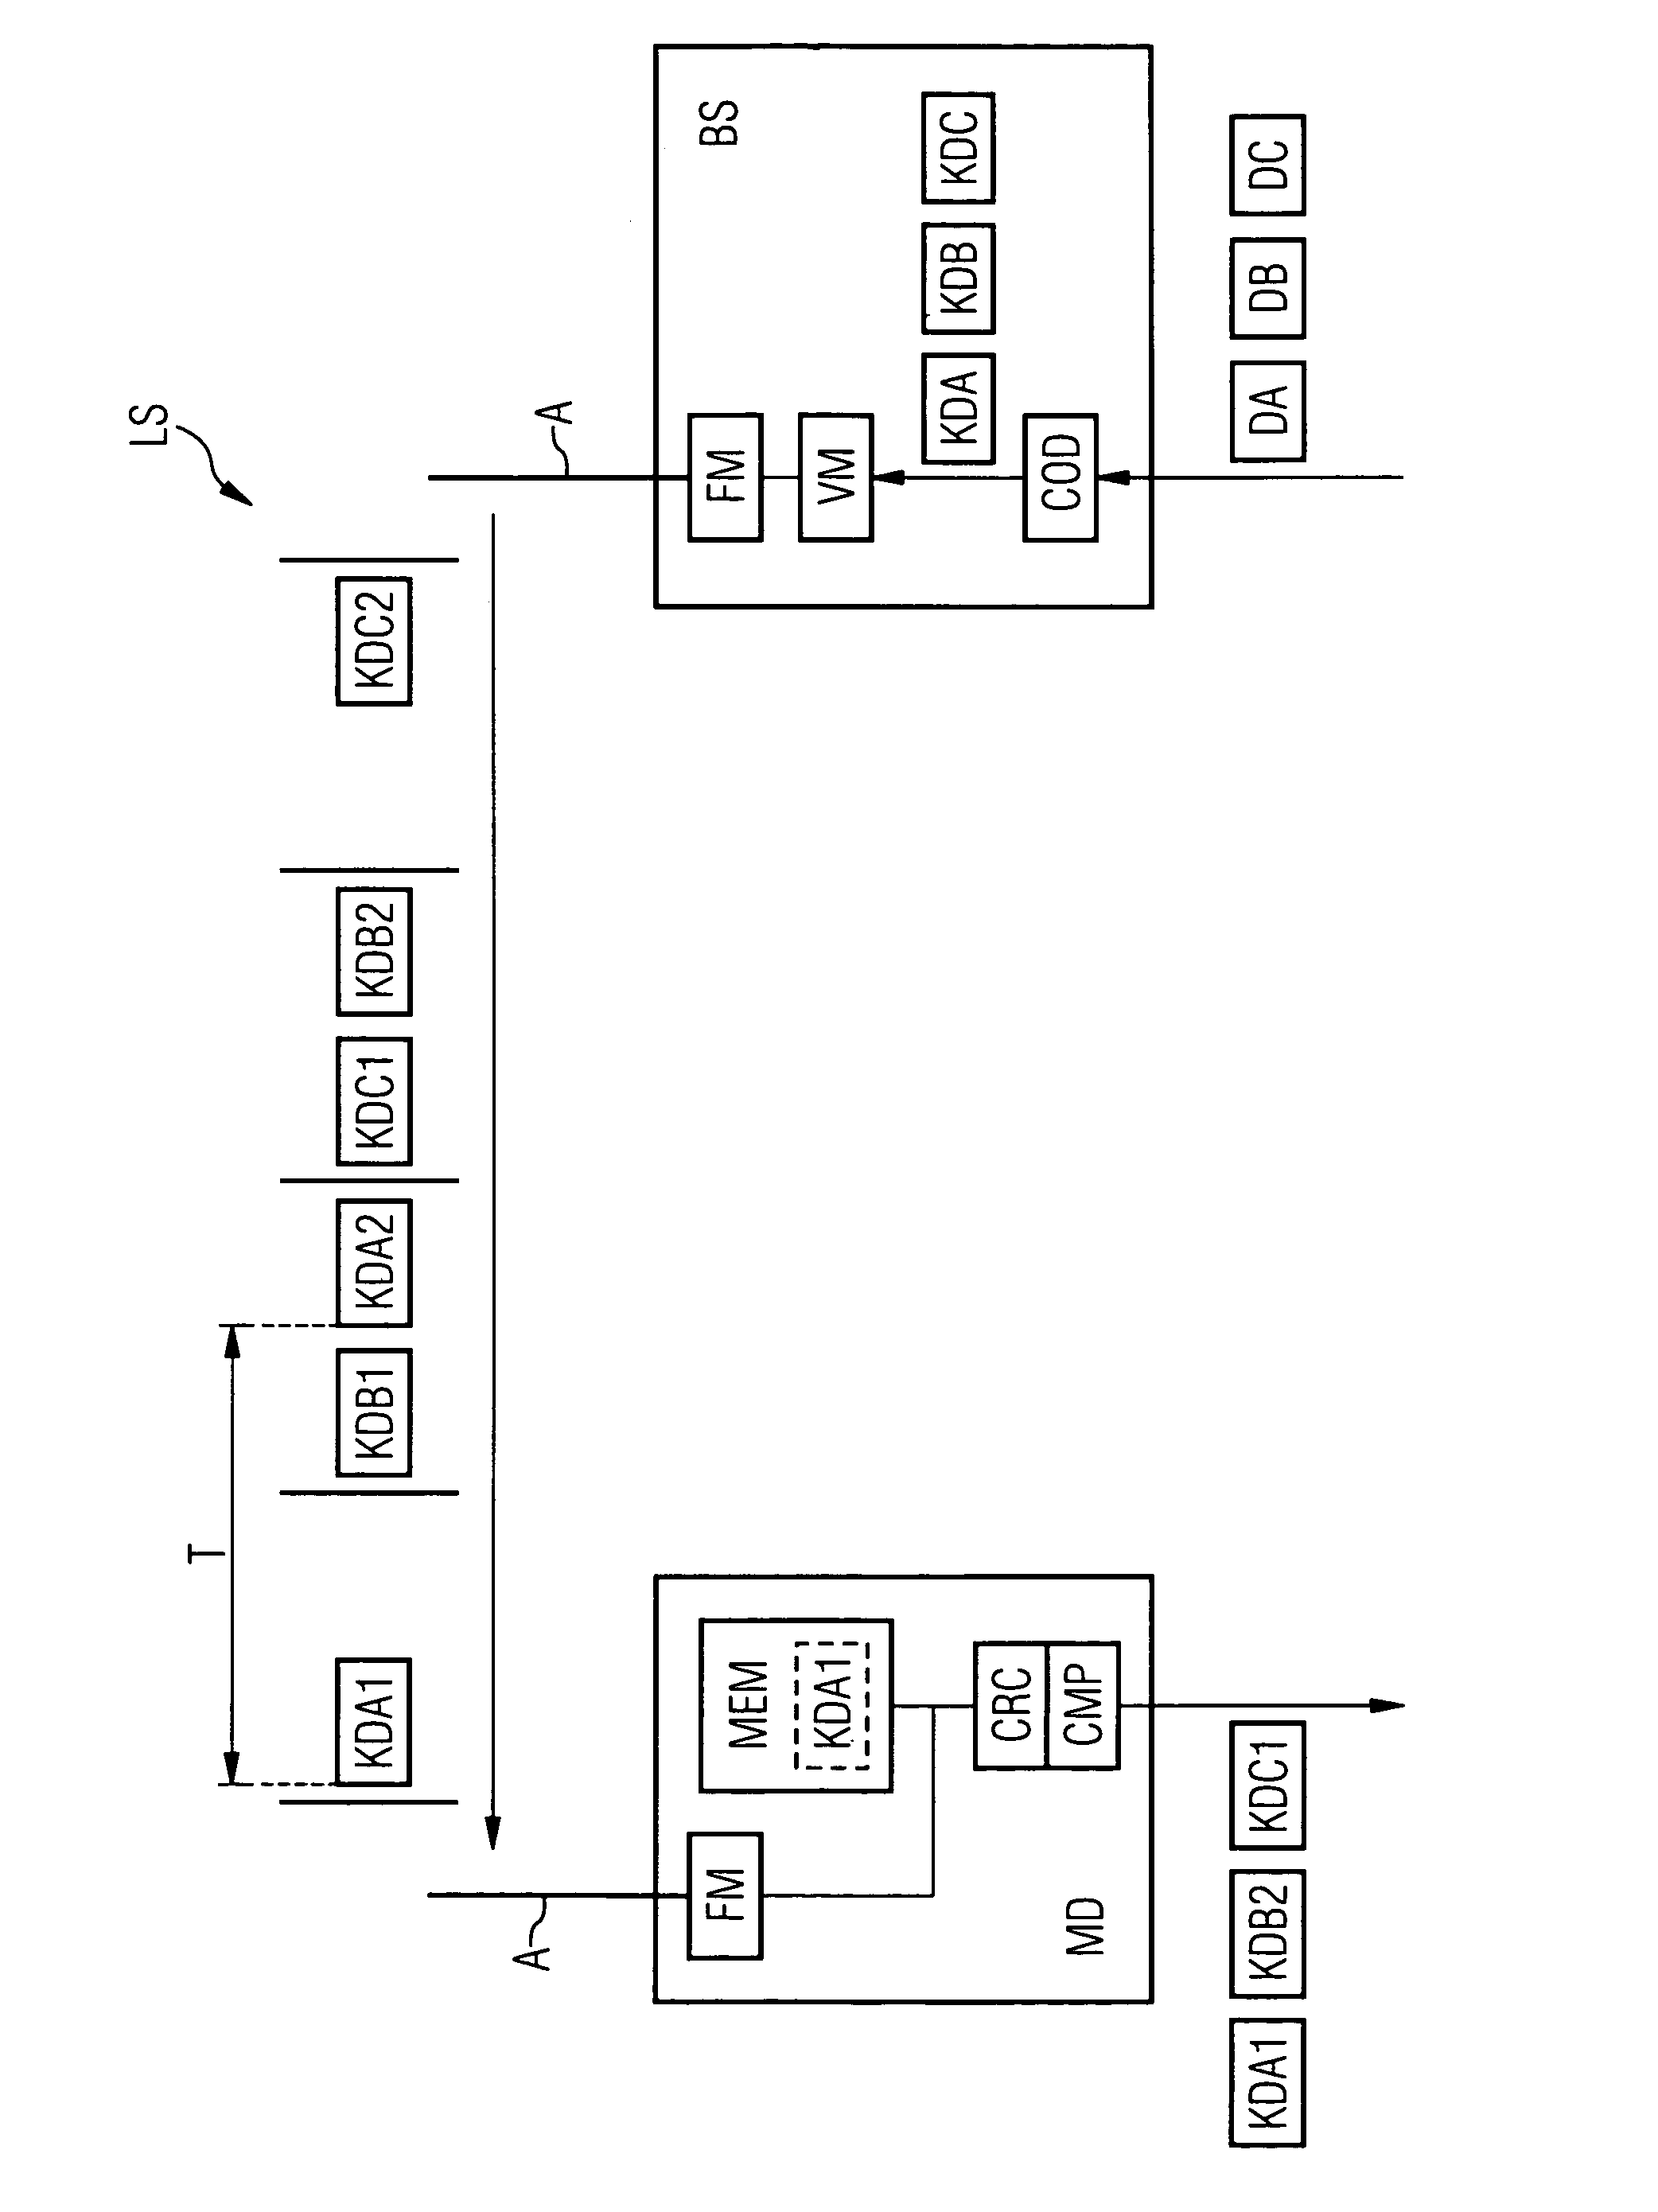 Method for improving the quality of voice transmission via a radio interface